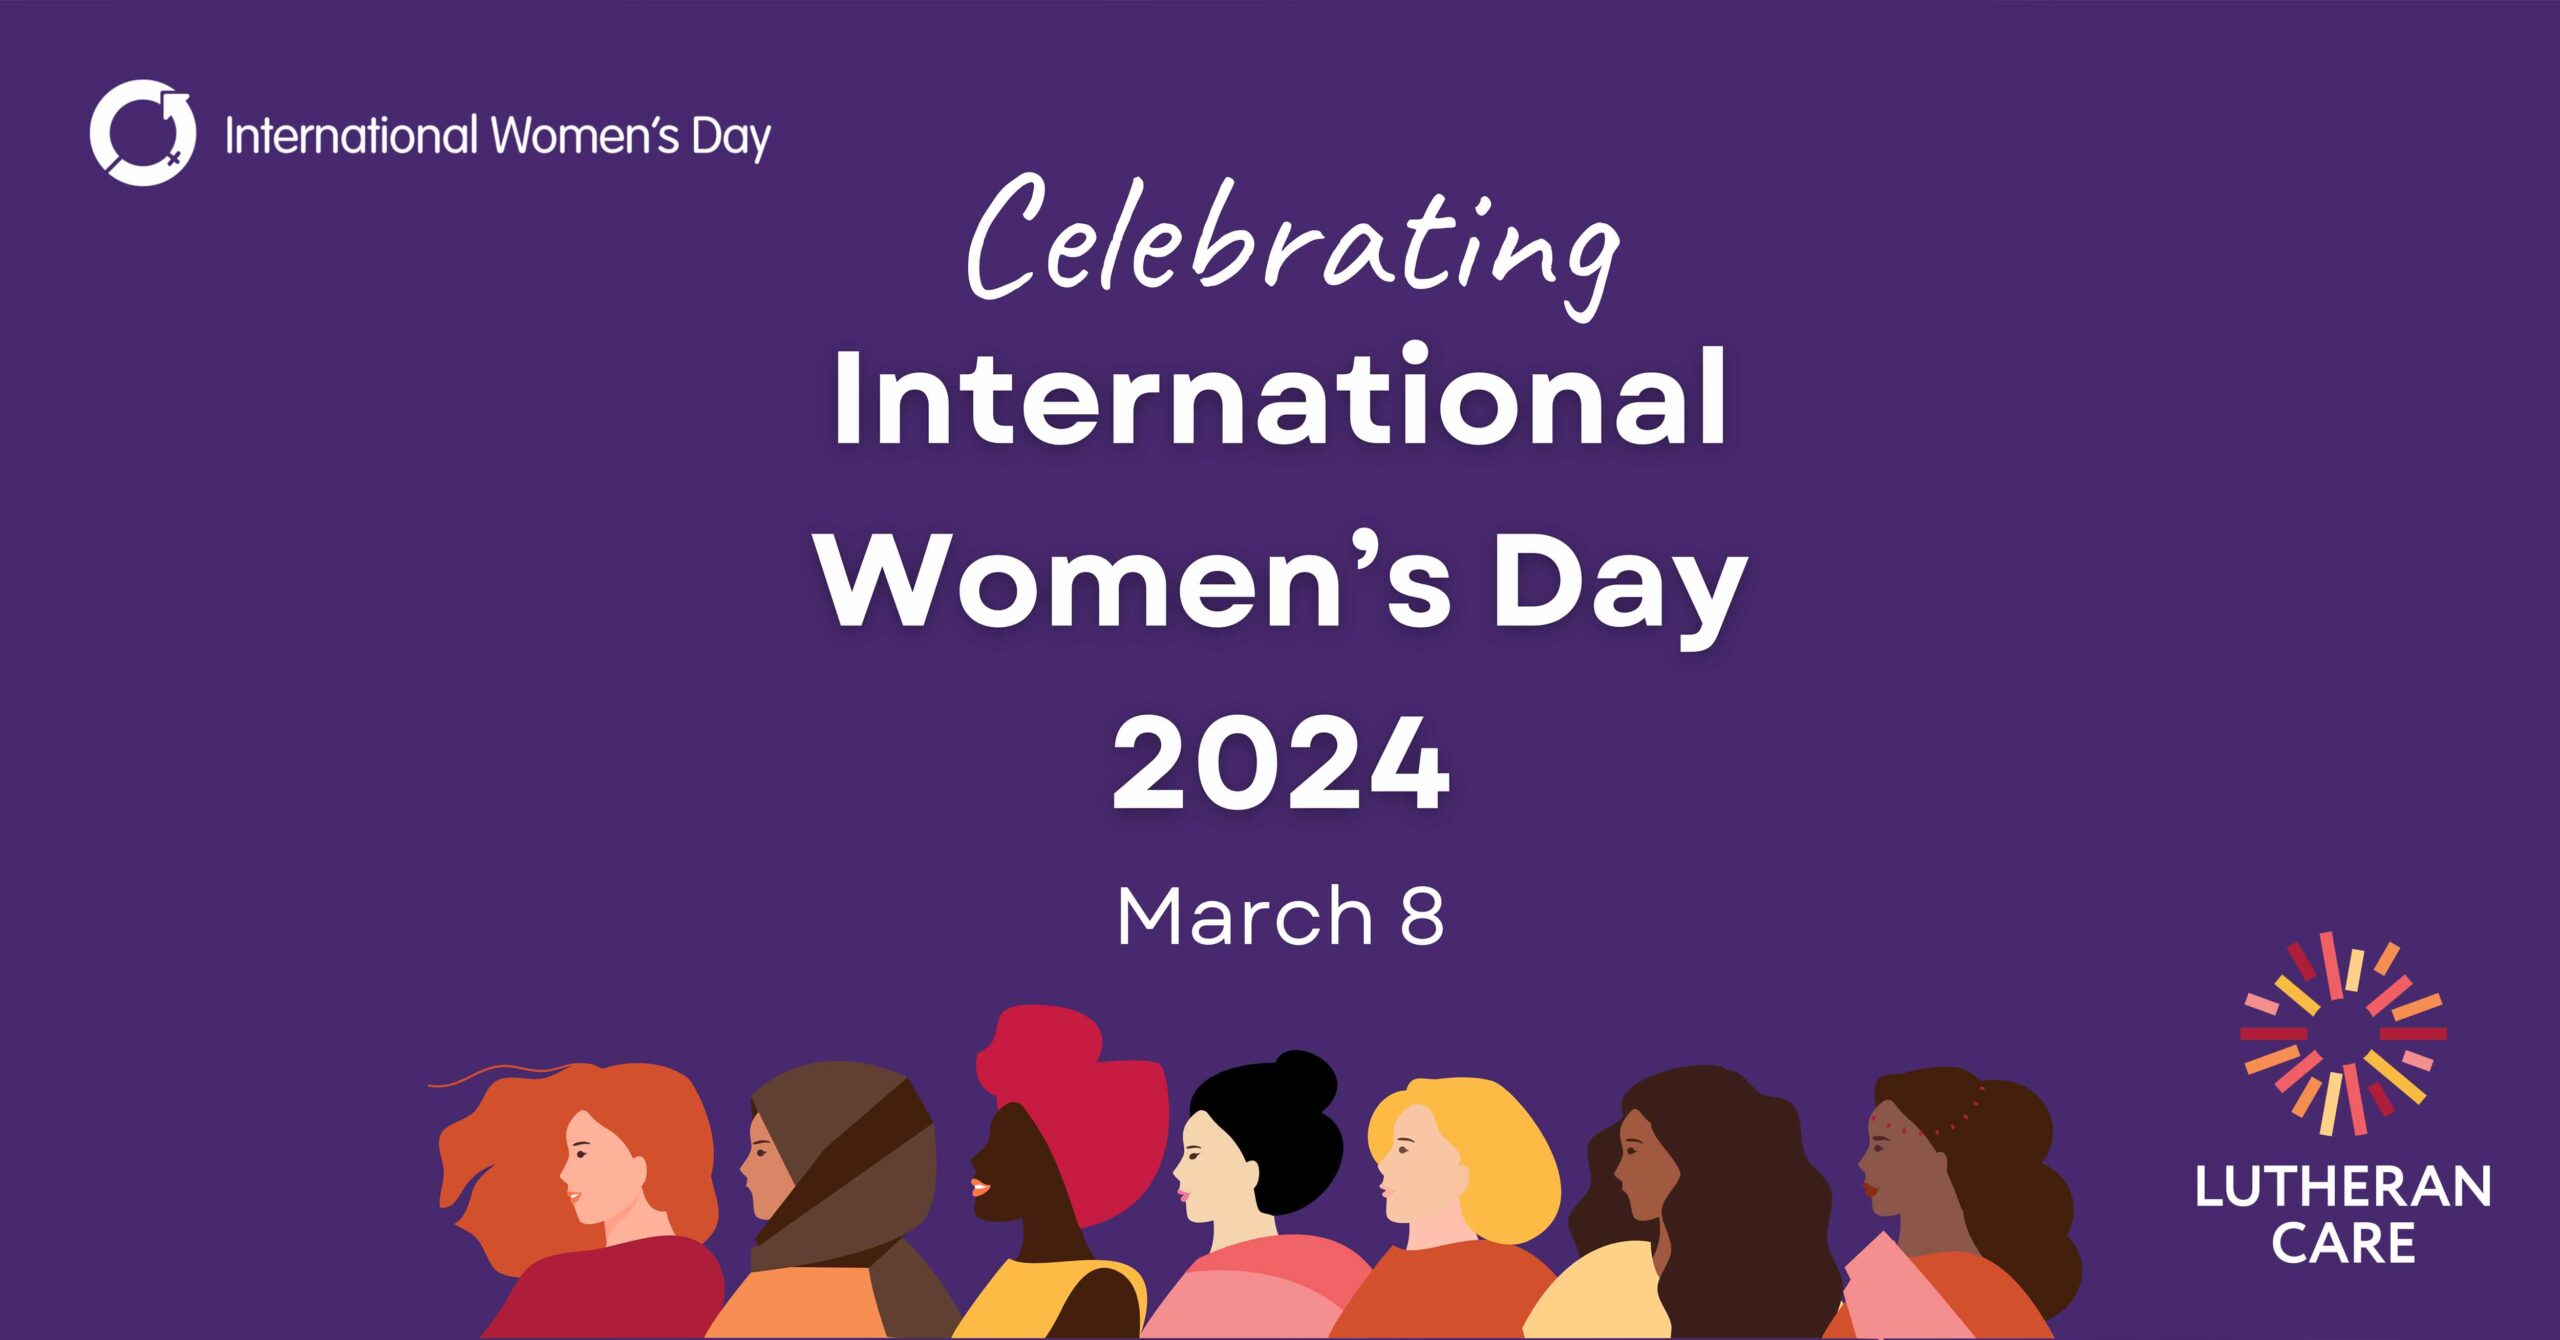 Image with purple background and text saying celebrating International Women's Day 2024 March 8. International Women's Day and Lutheran Care logo appear.